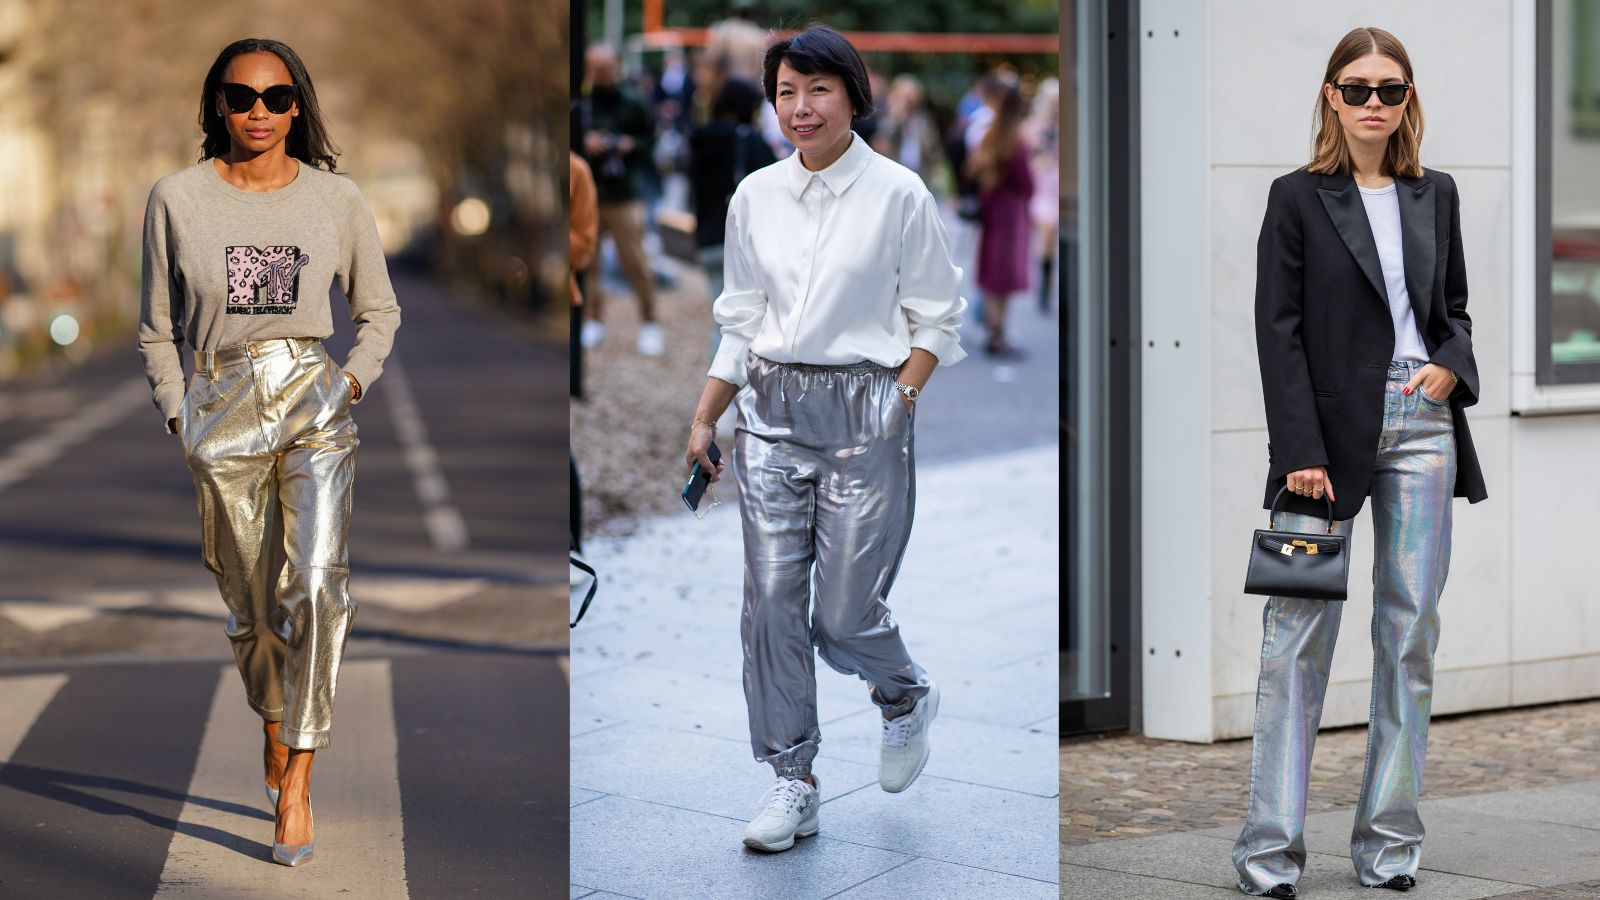 How to wear metallic pants with style and sophistication